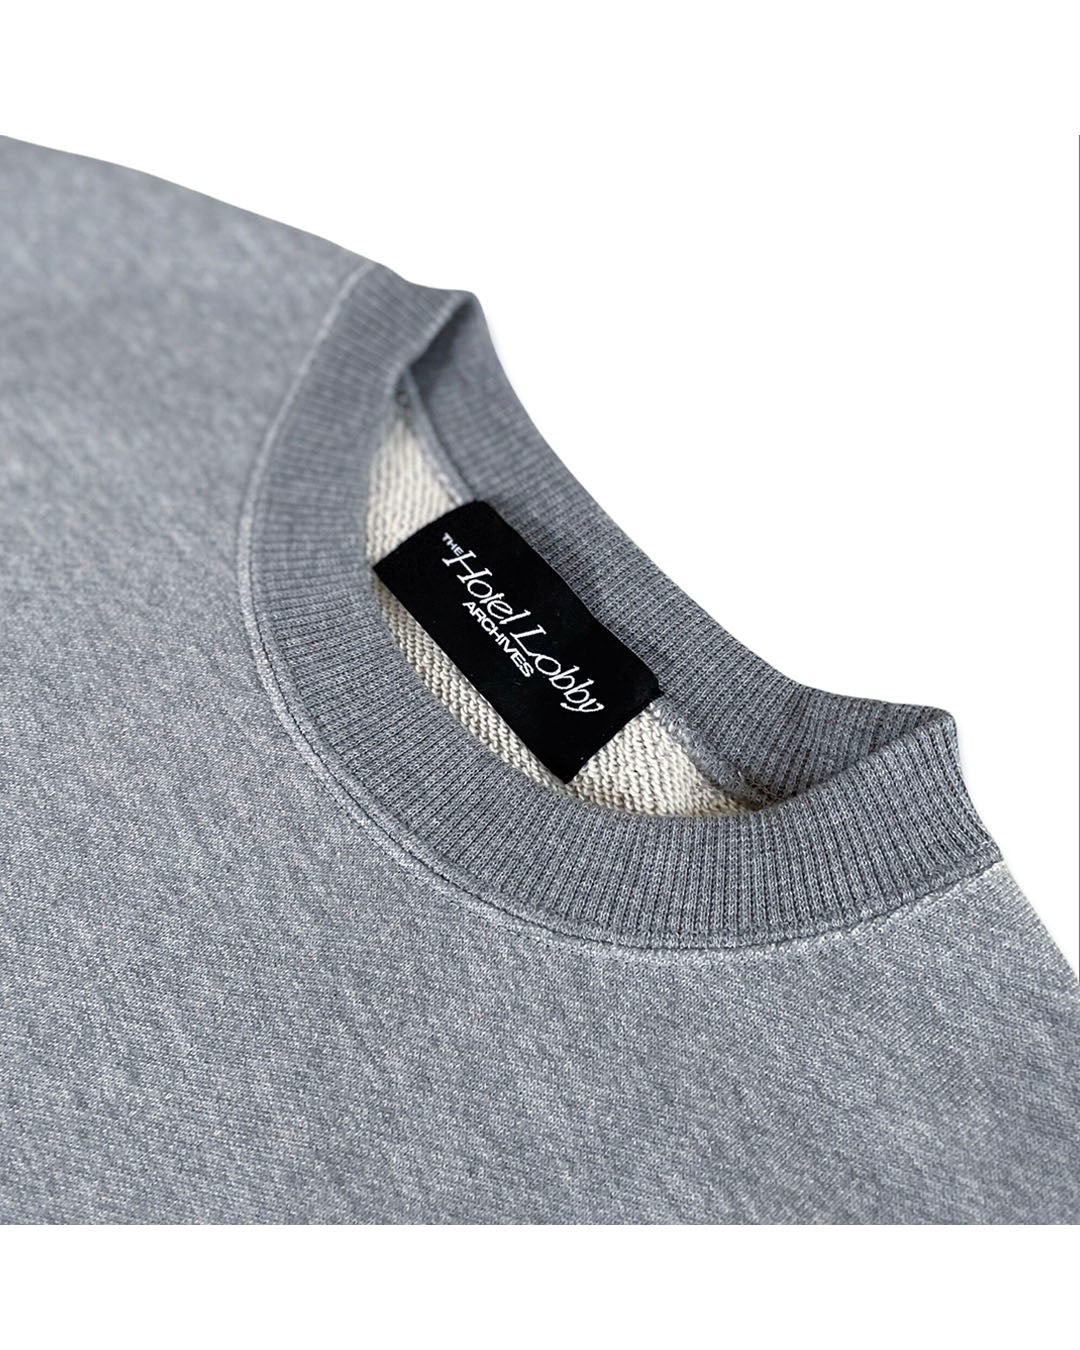 [THE HOTEL LOBBY ARCHIVES] PLANE SWEAT SHIRT - GRAY